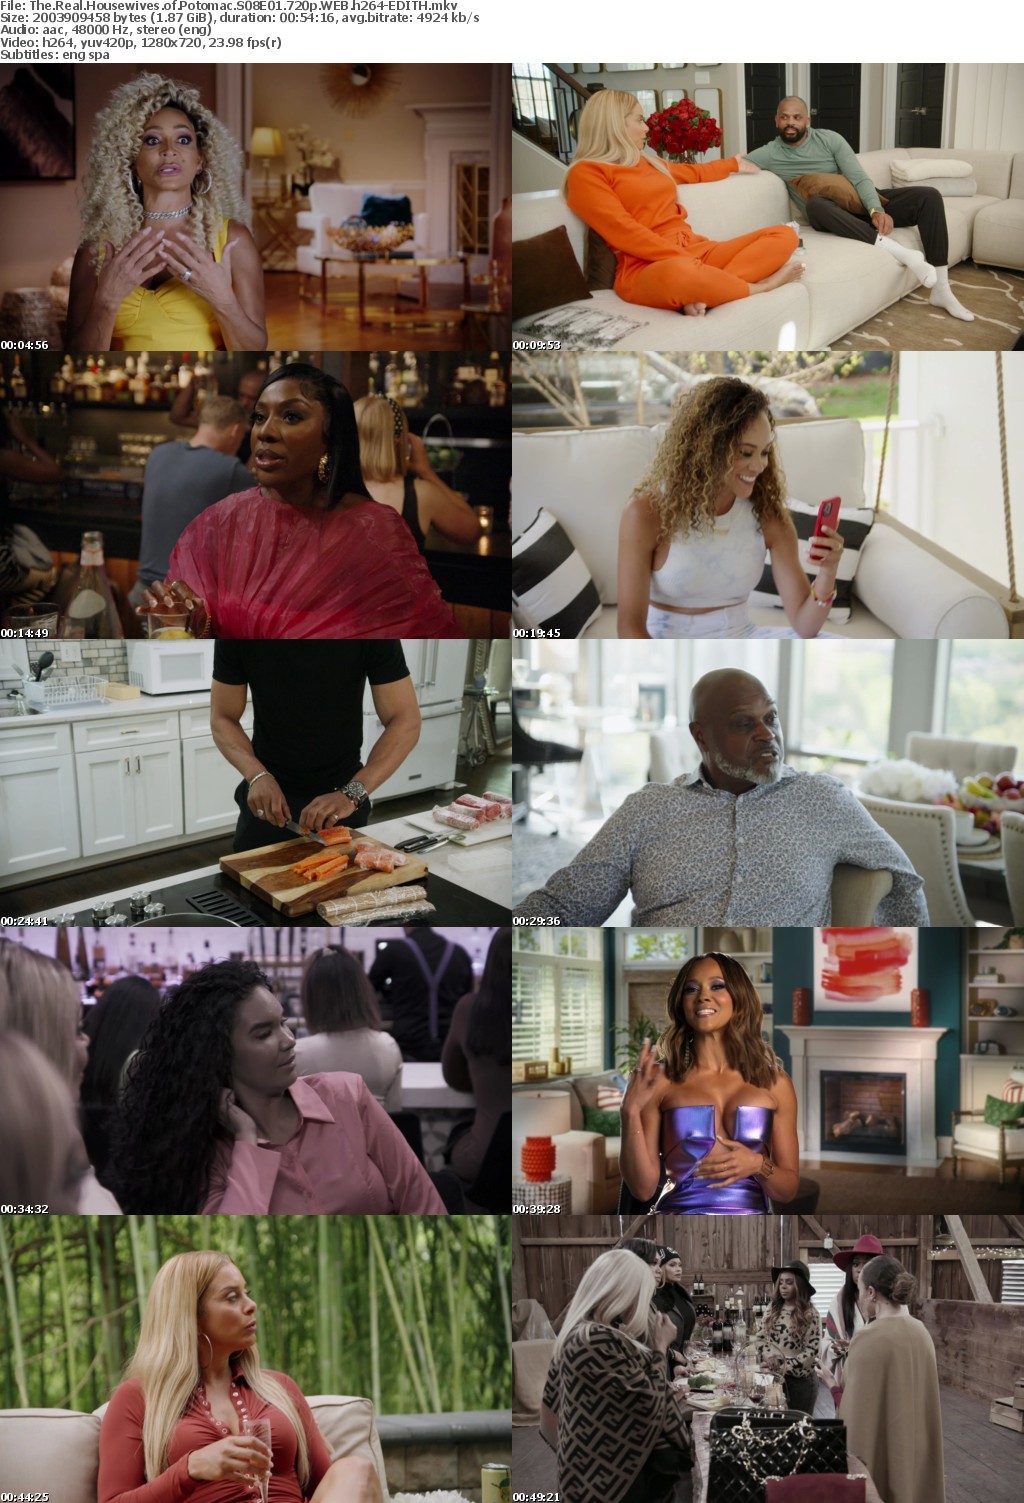 The Real Housewives of Potomac S08E01 720p WEB h264-EDITH